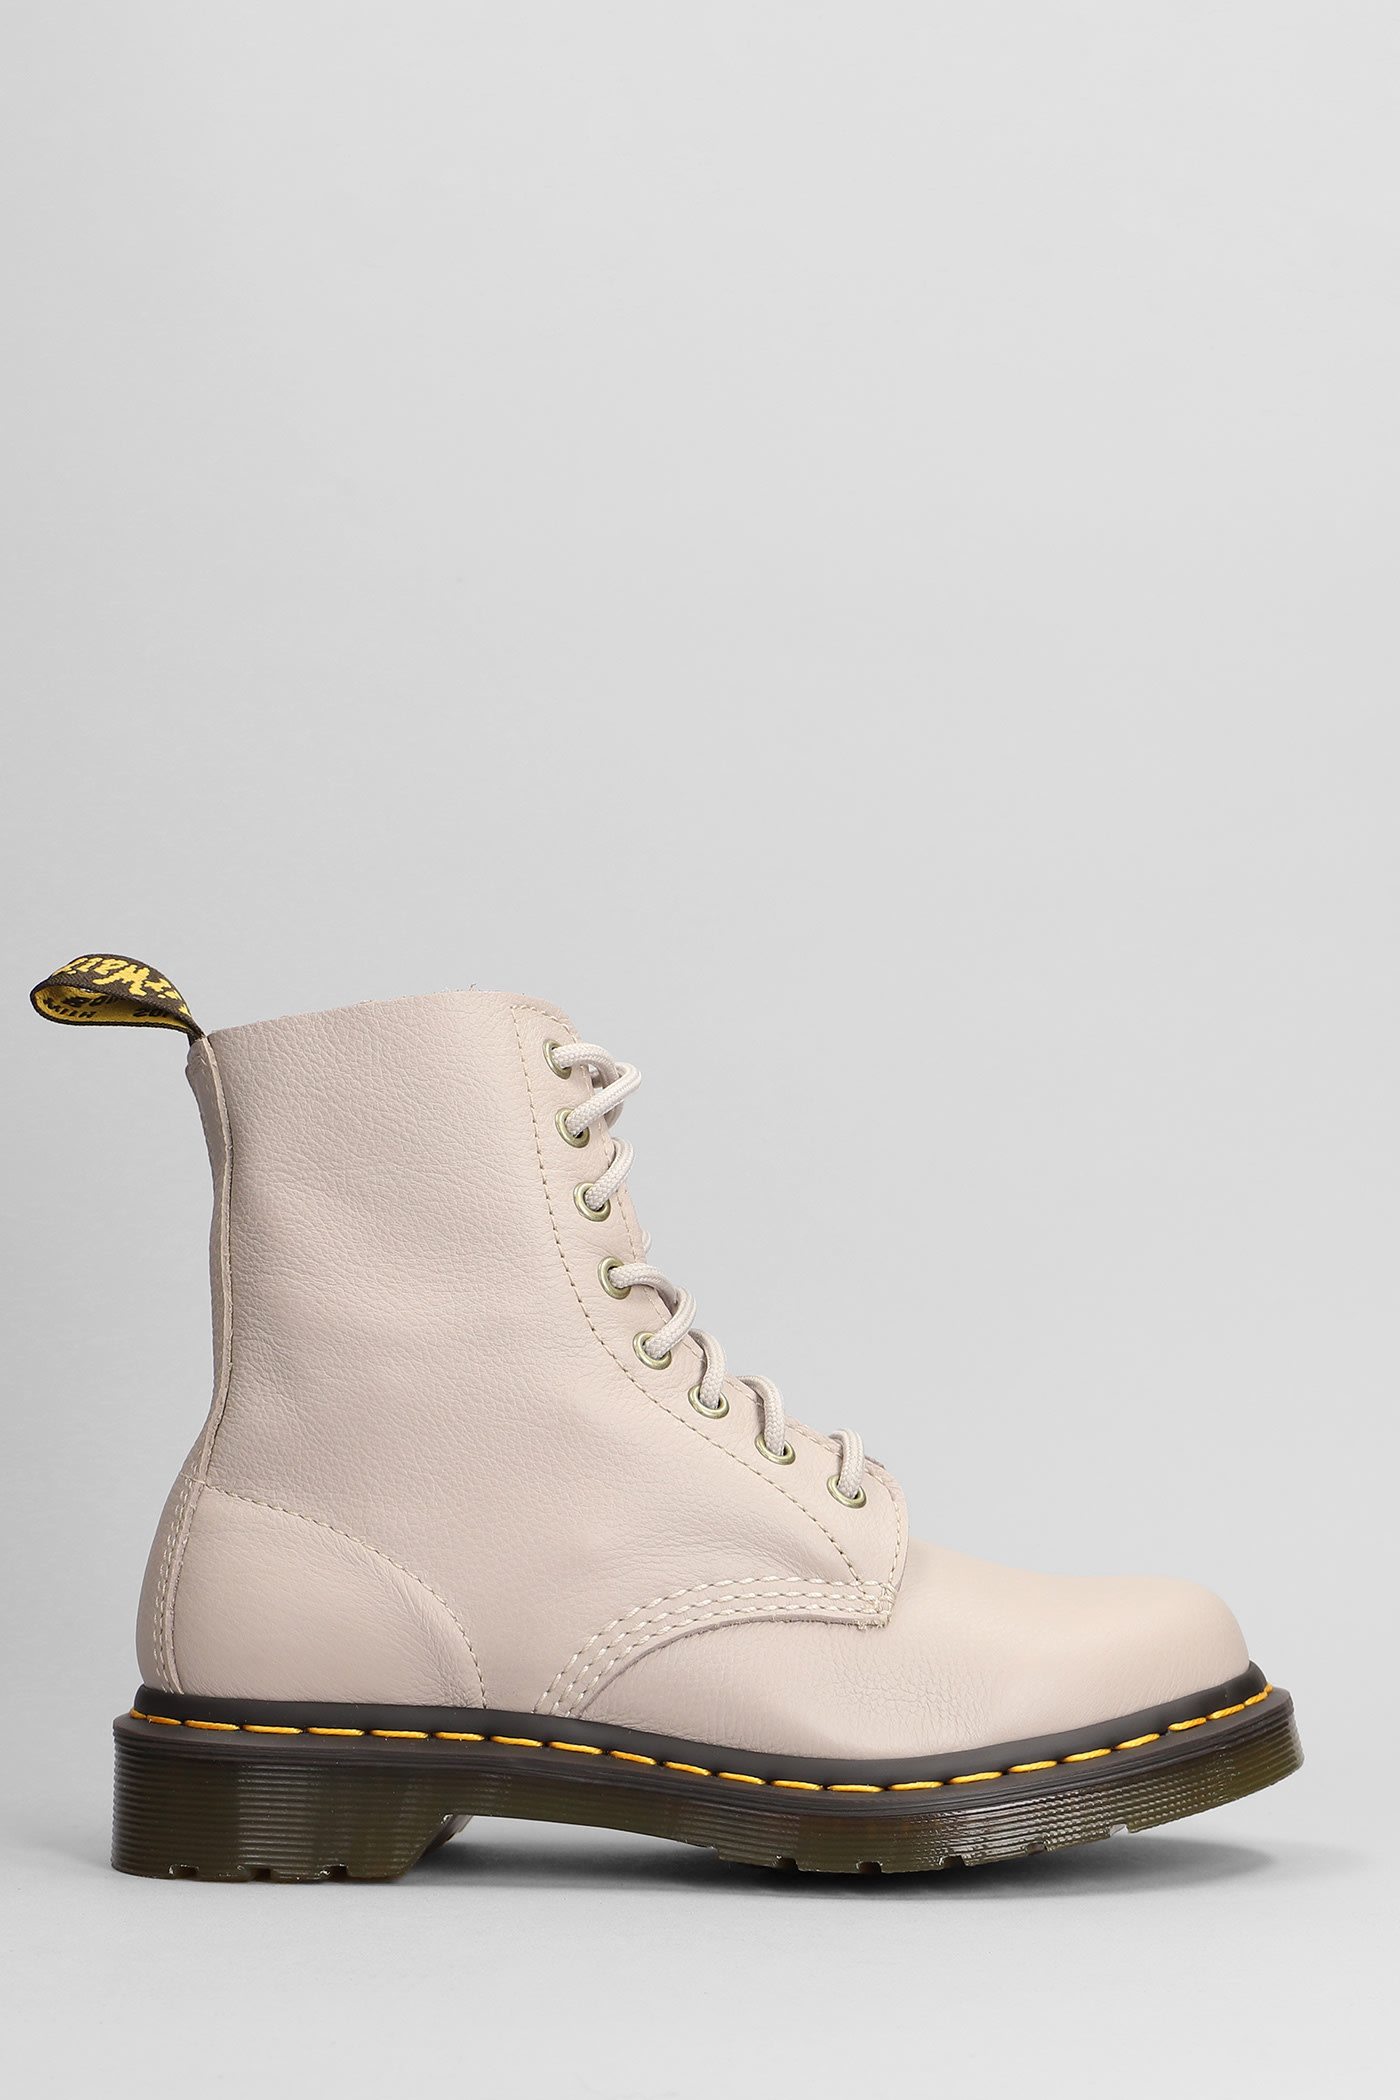 Dr. Martens 1460 Combat Boots In Taupe Leather